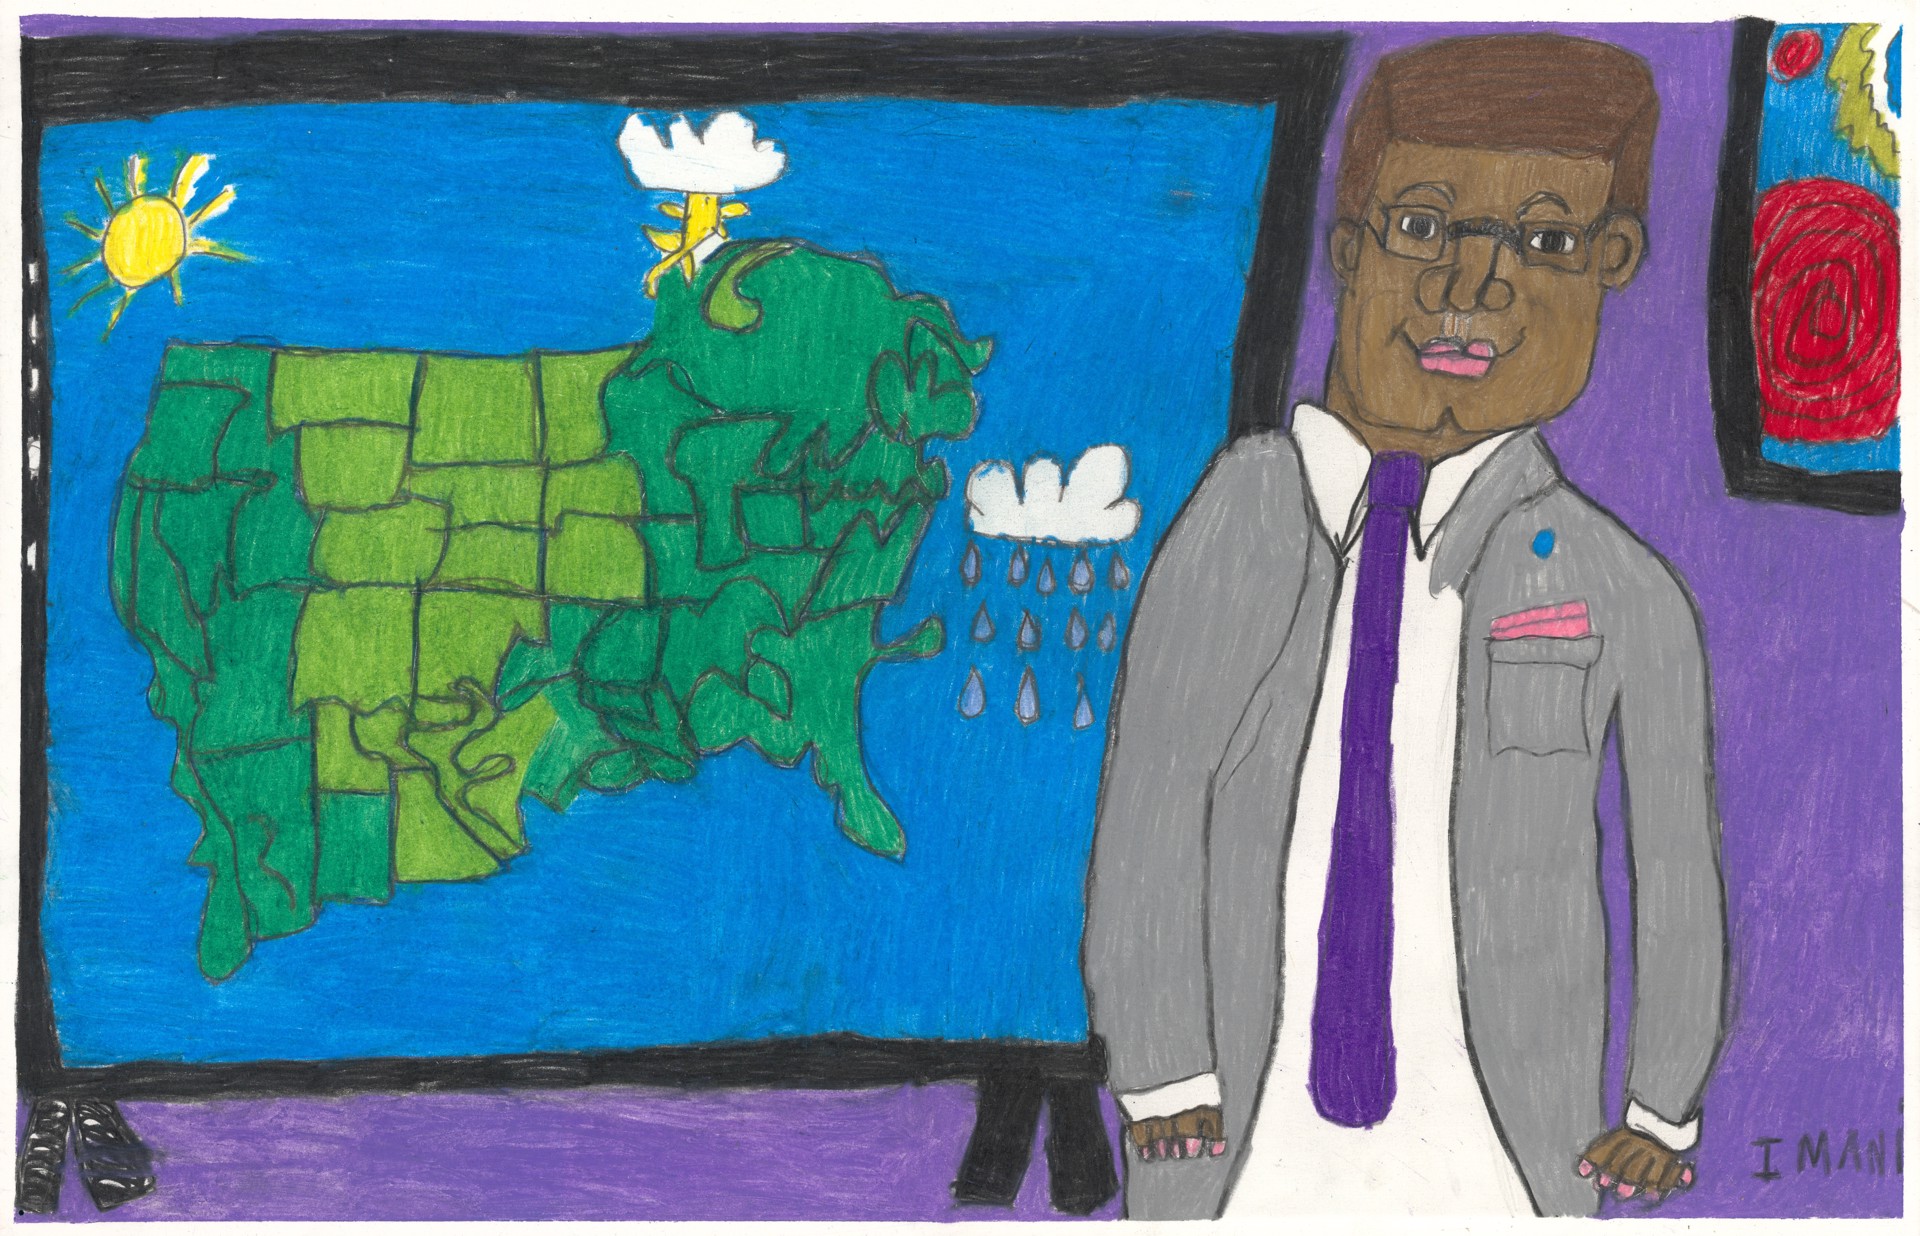 The Weather Man by Imani Turner